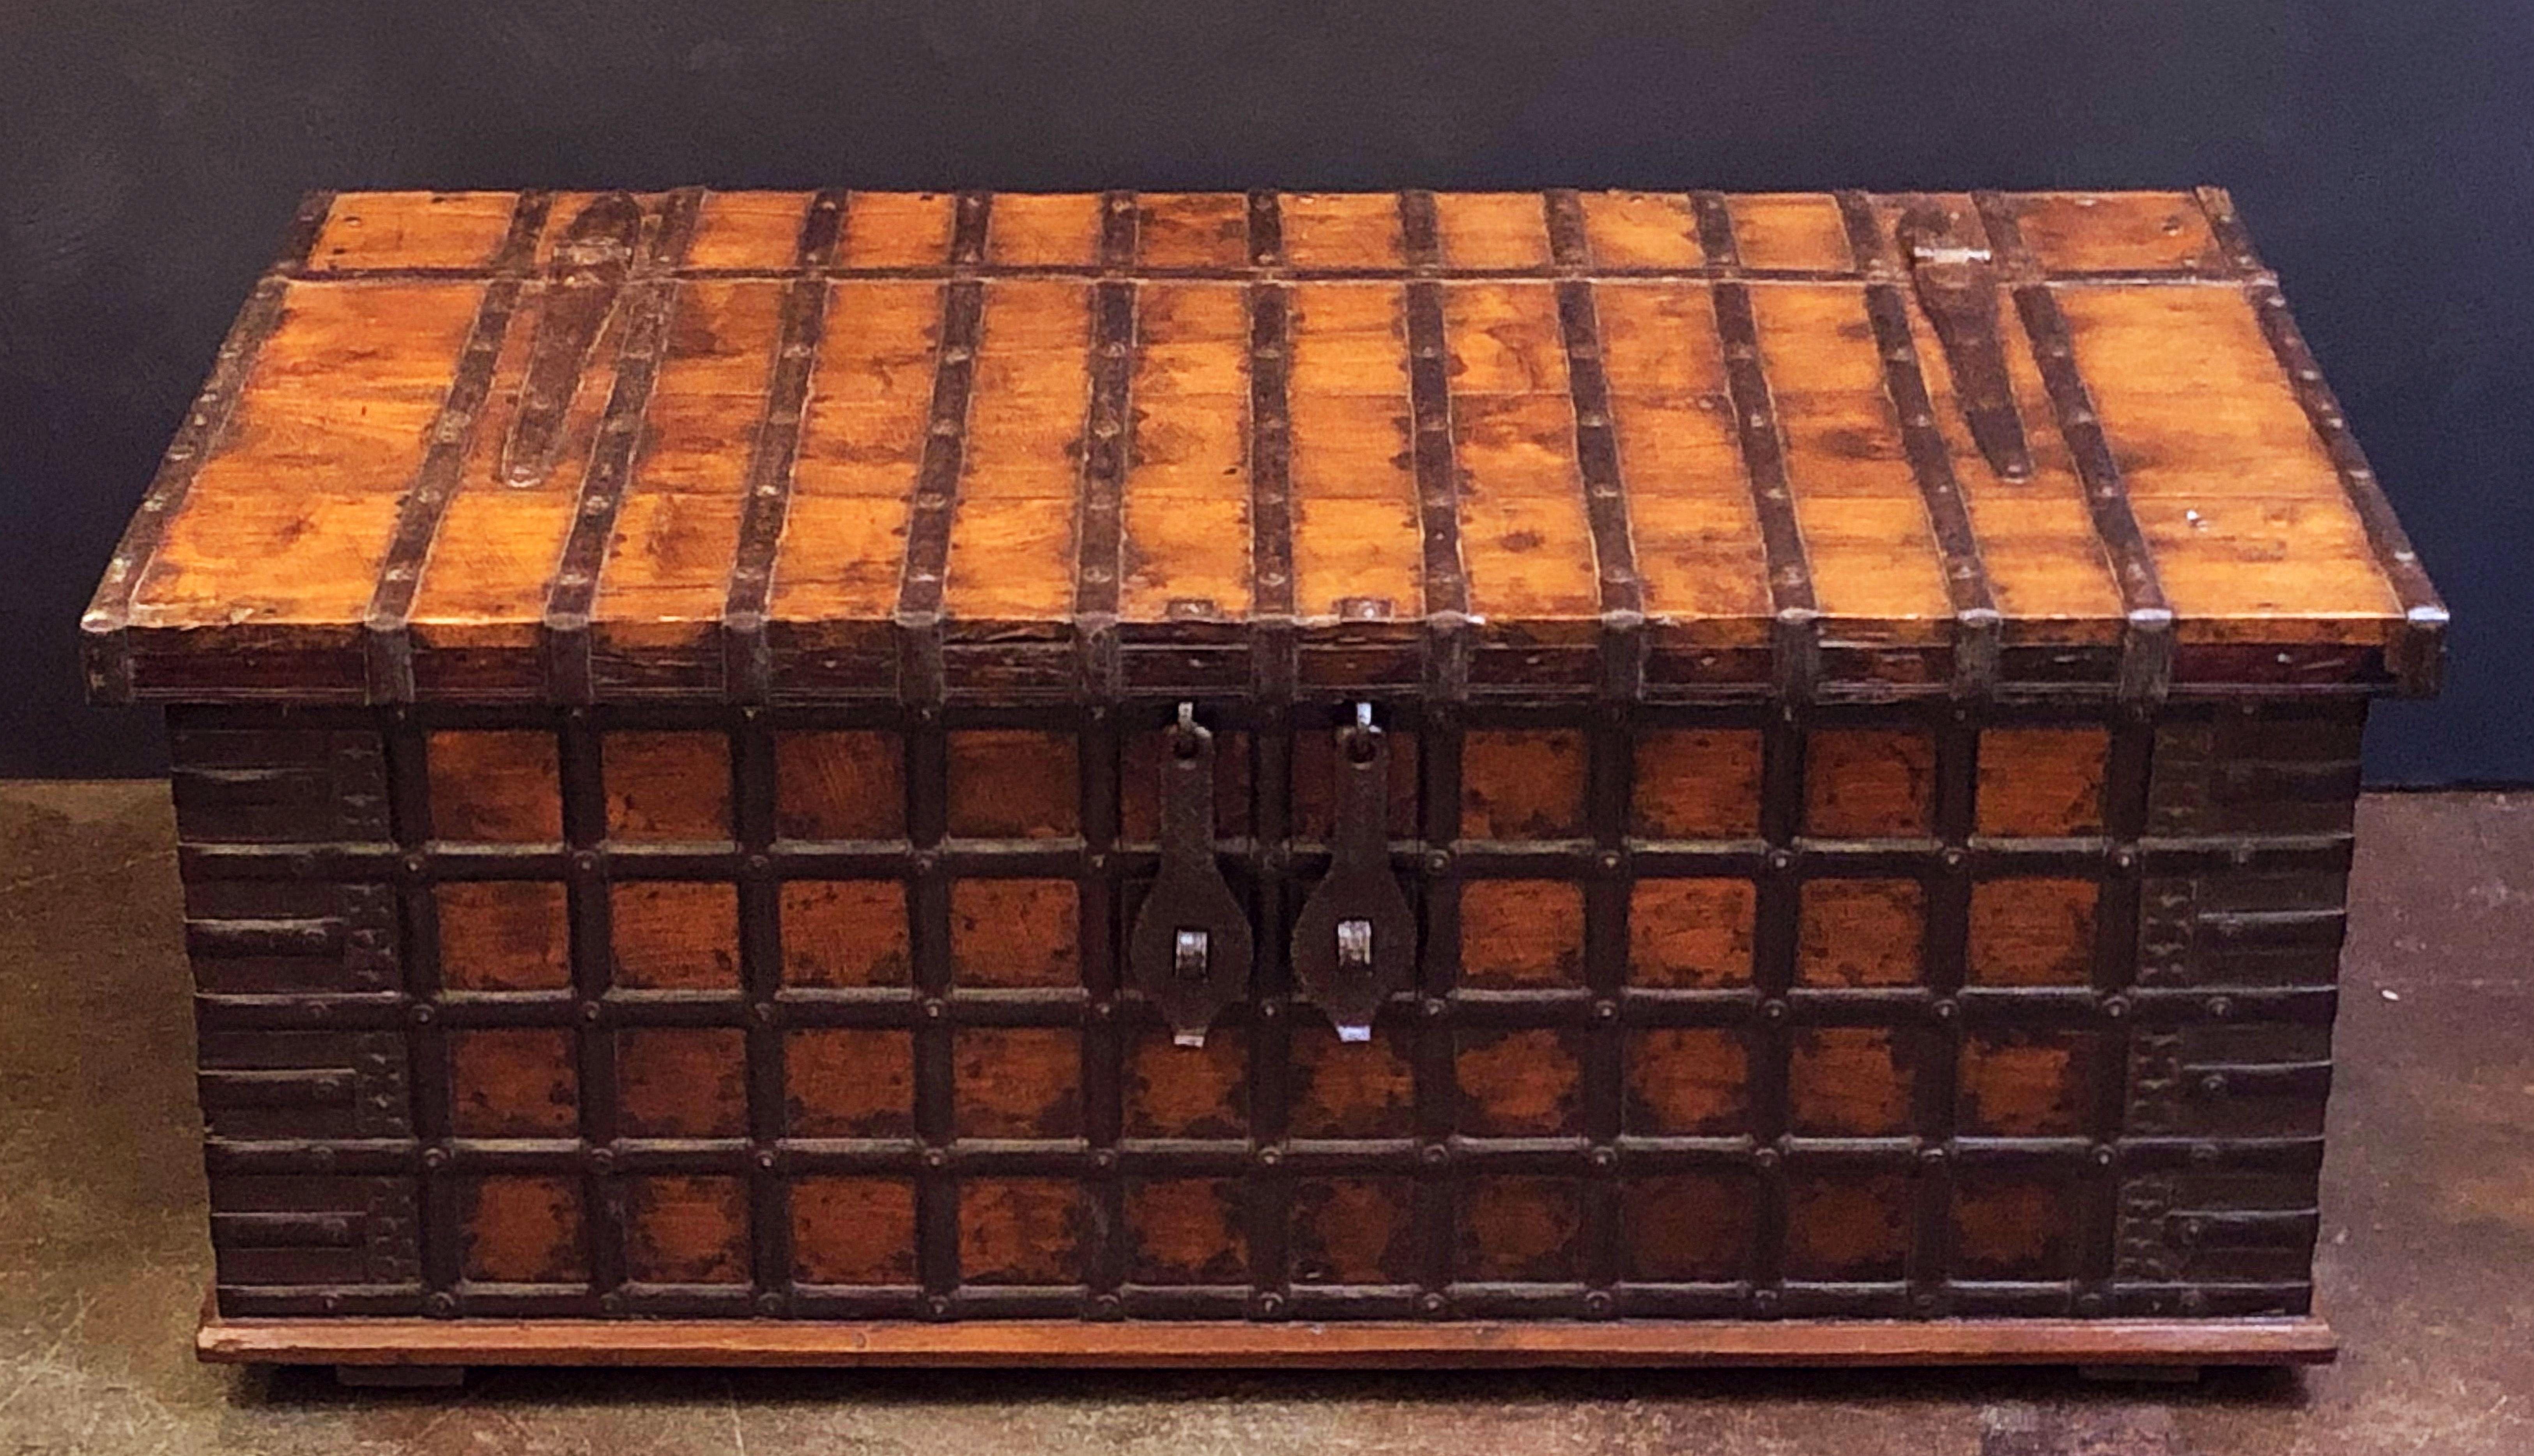 A handsome large 19th century rectangular iron-bound wooden coffer box or Rajasthan trunk from British Colonial India (The Raj) featuring a hinged top hatch with storage inside. 

Traditionally used for patio storage in Indian havelis - Makes a